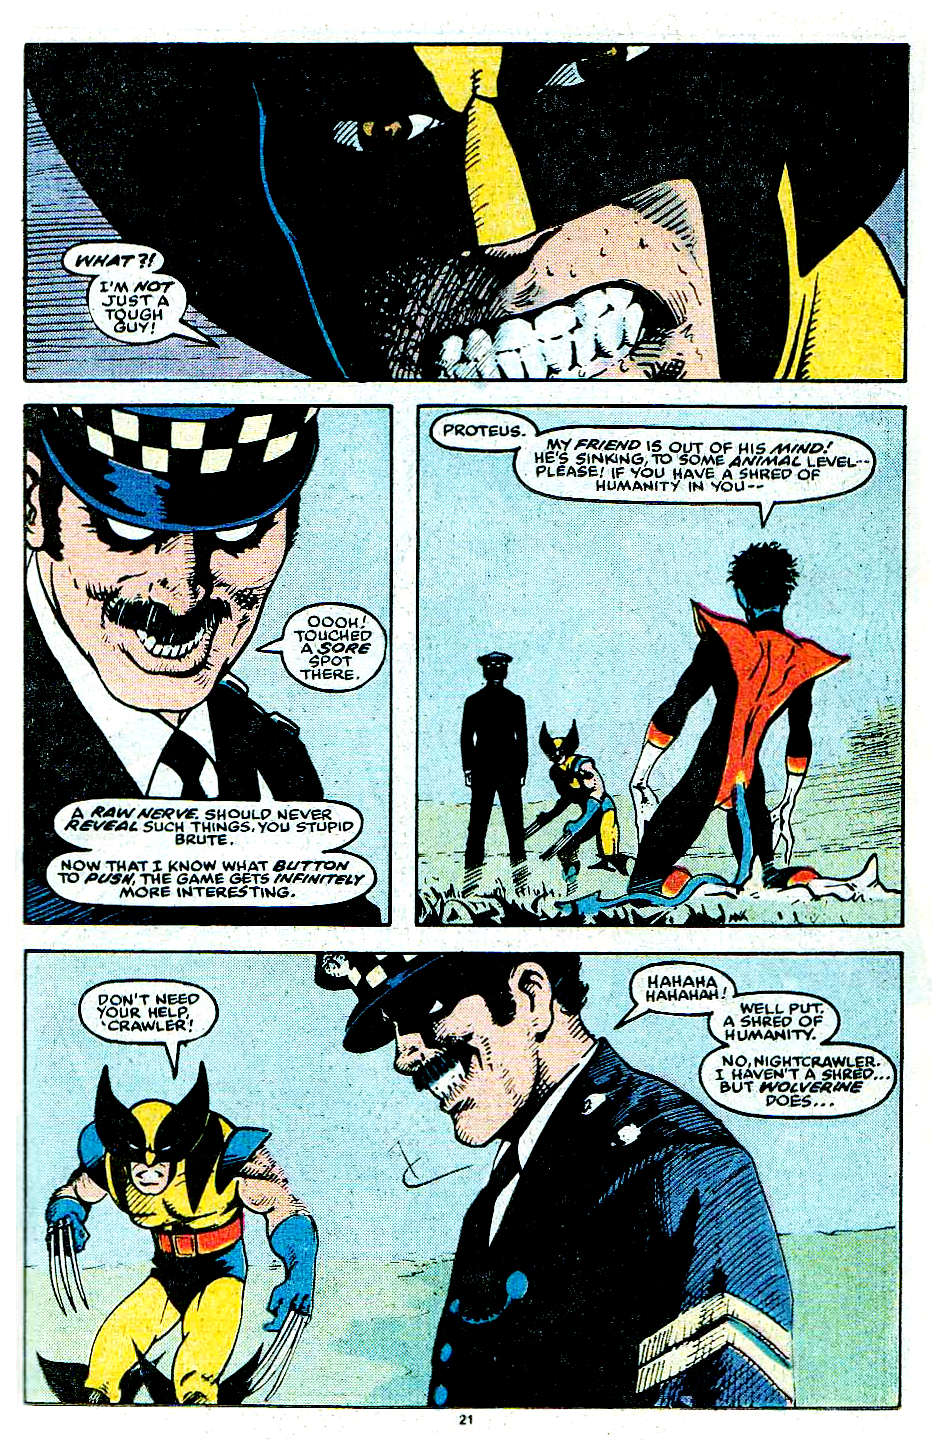 Classic X Men Issue 32 Viewcomic Reading Comics Online For Free 19